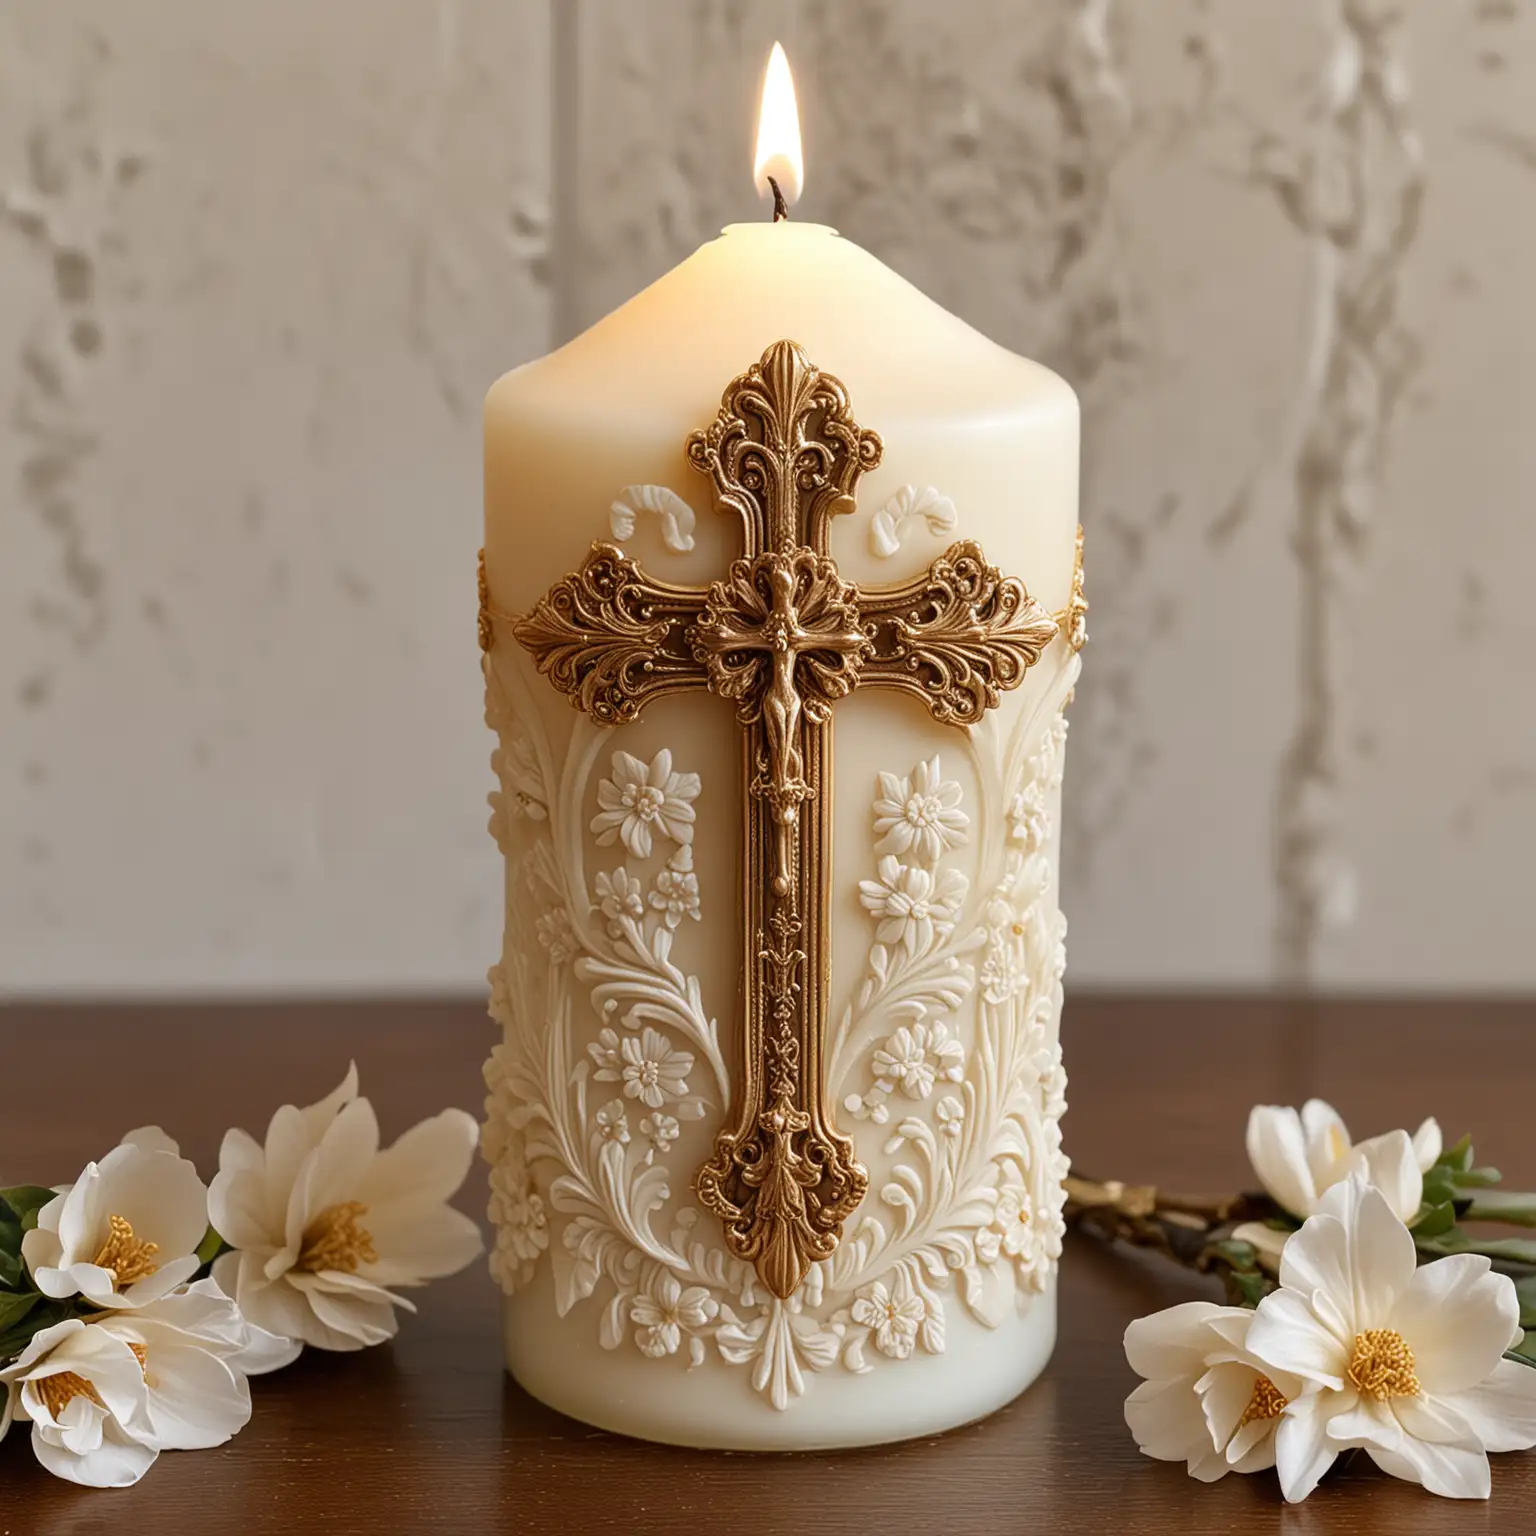 ornate candle with detail wax relief attached.  flowers and gold cross in the background.